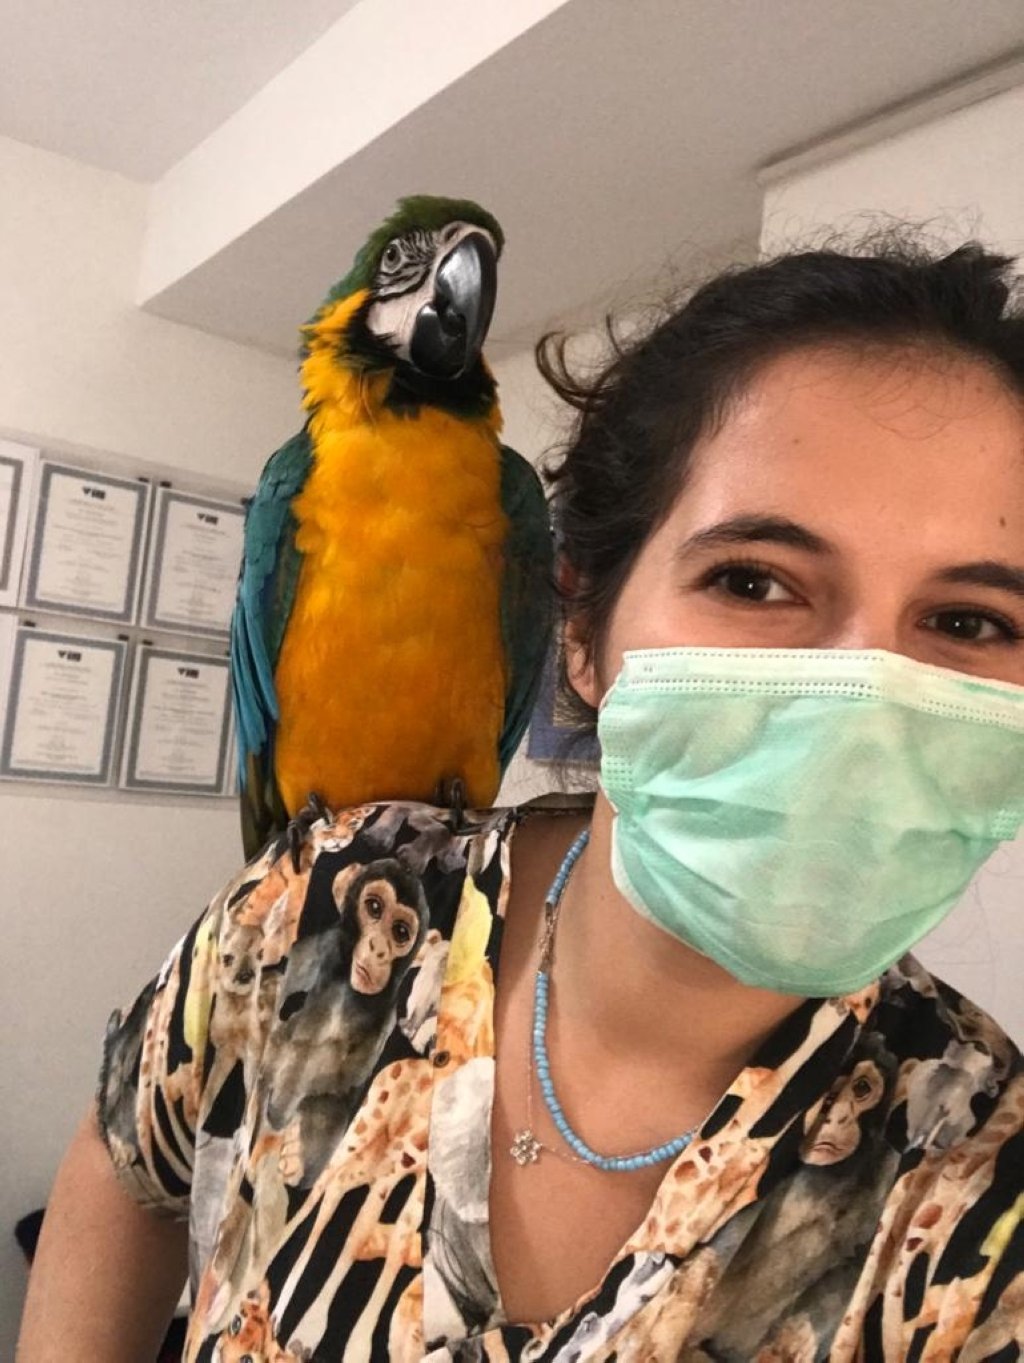 Merve Siirtli, a veterinarian at the exotic animal hospital, with a Jaco parrot, Istanbul, Turkey. (Photo courtesy of hospital)